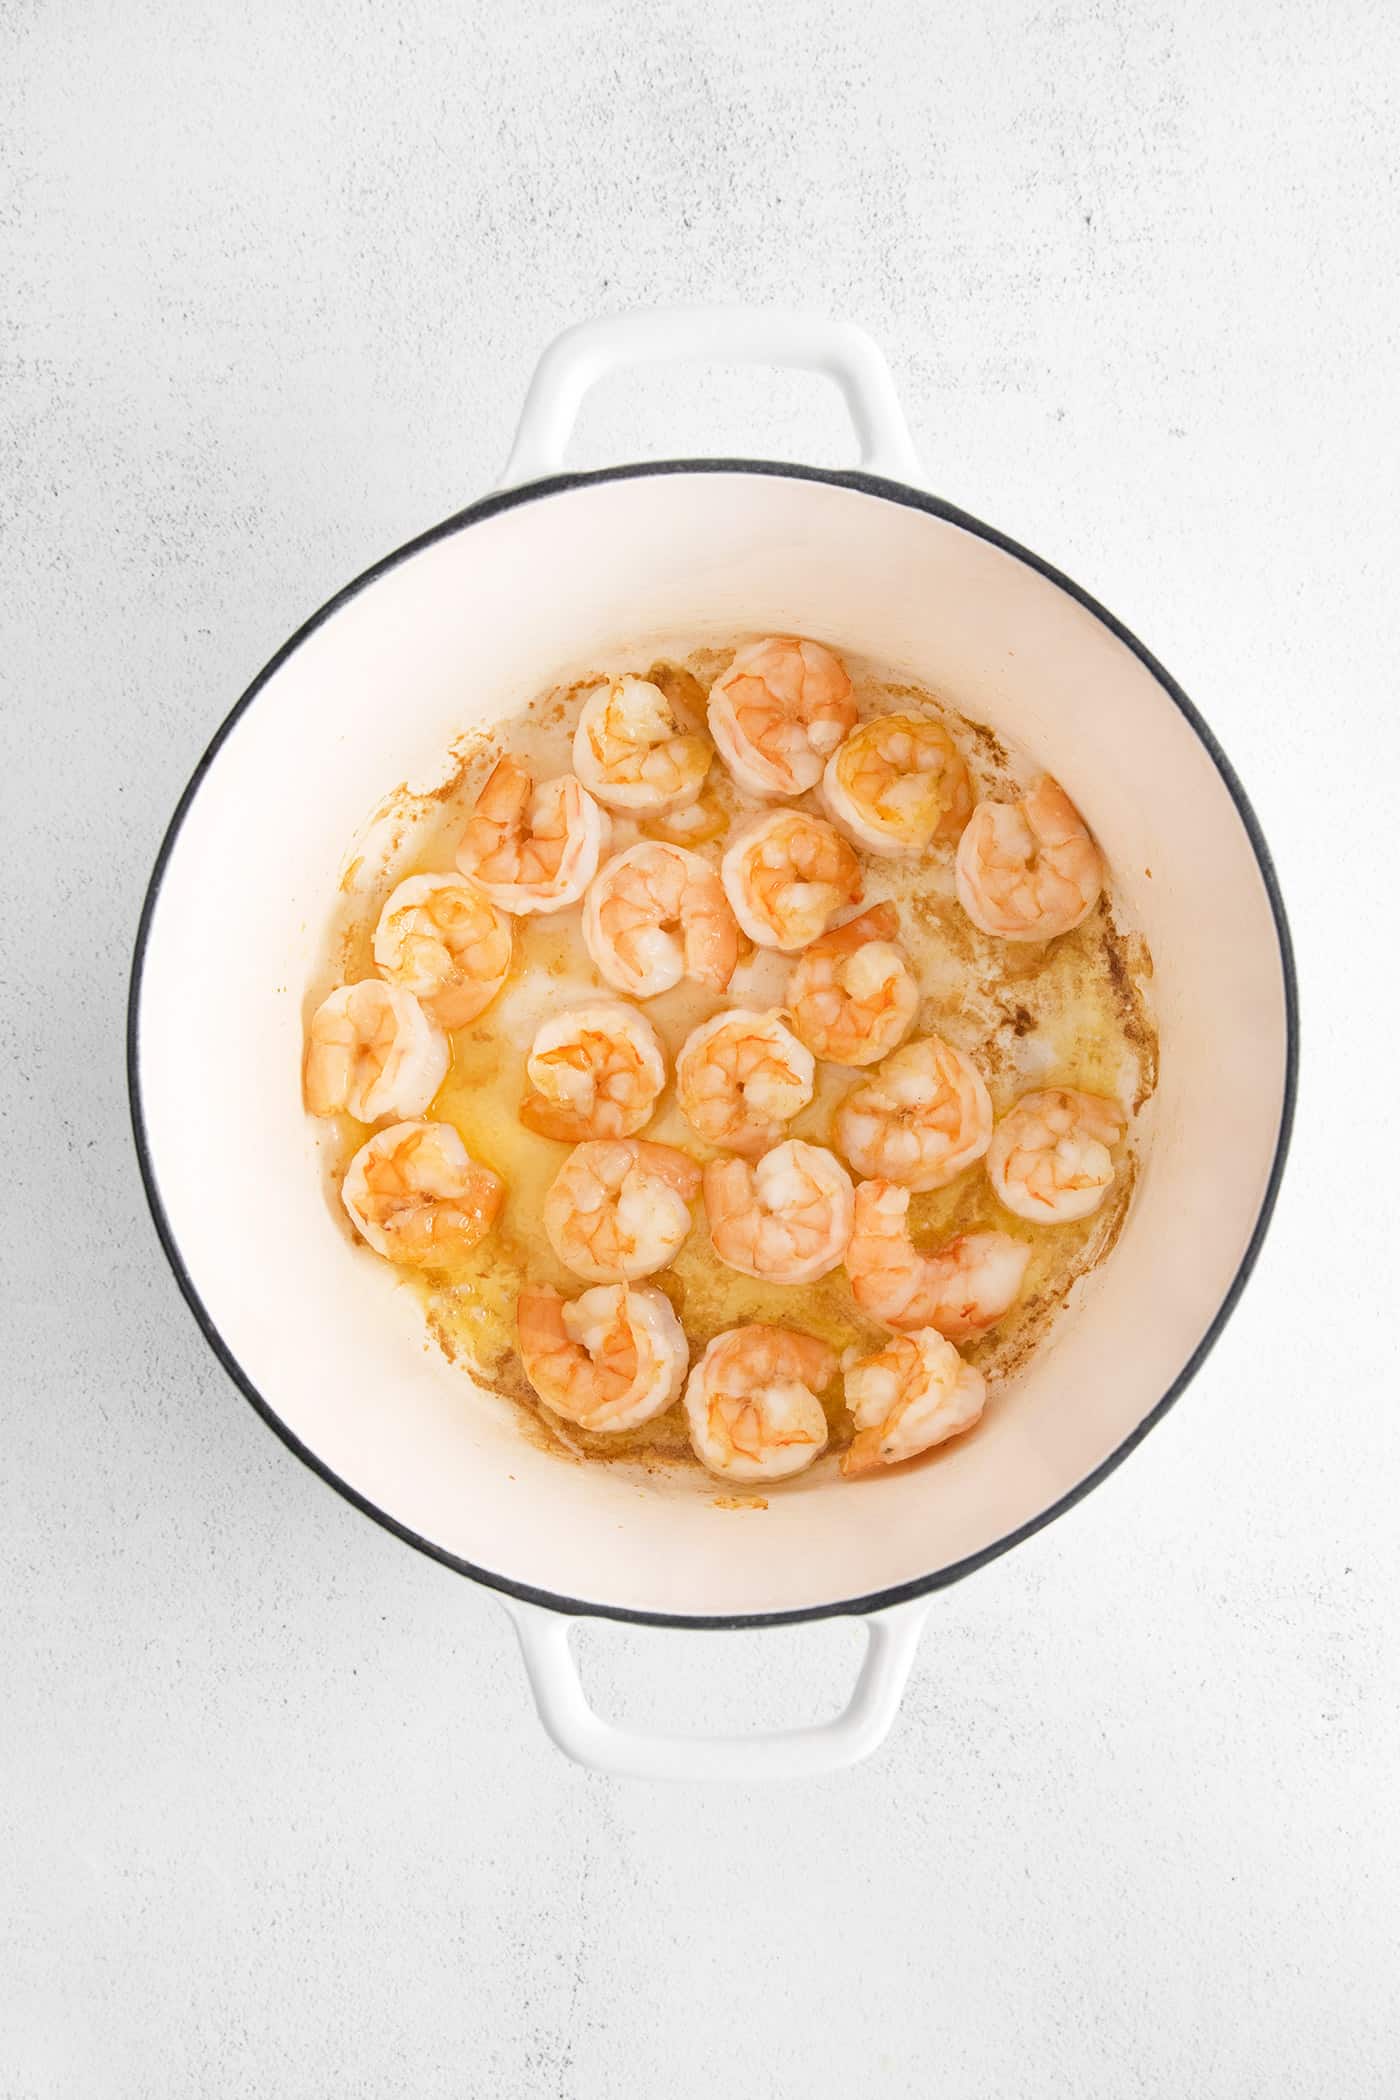 Shrimp sauteing in a pan